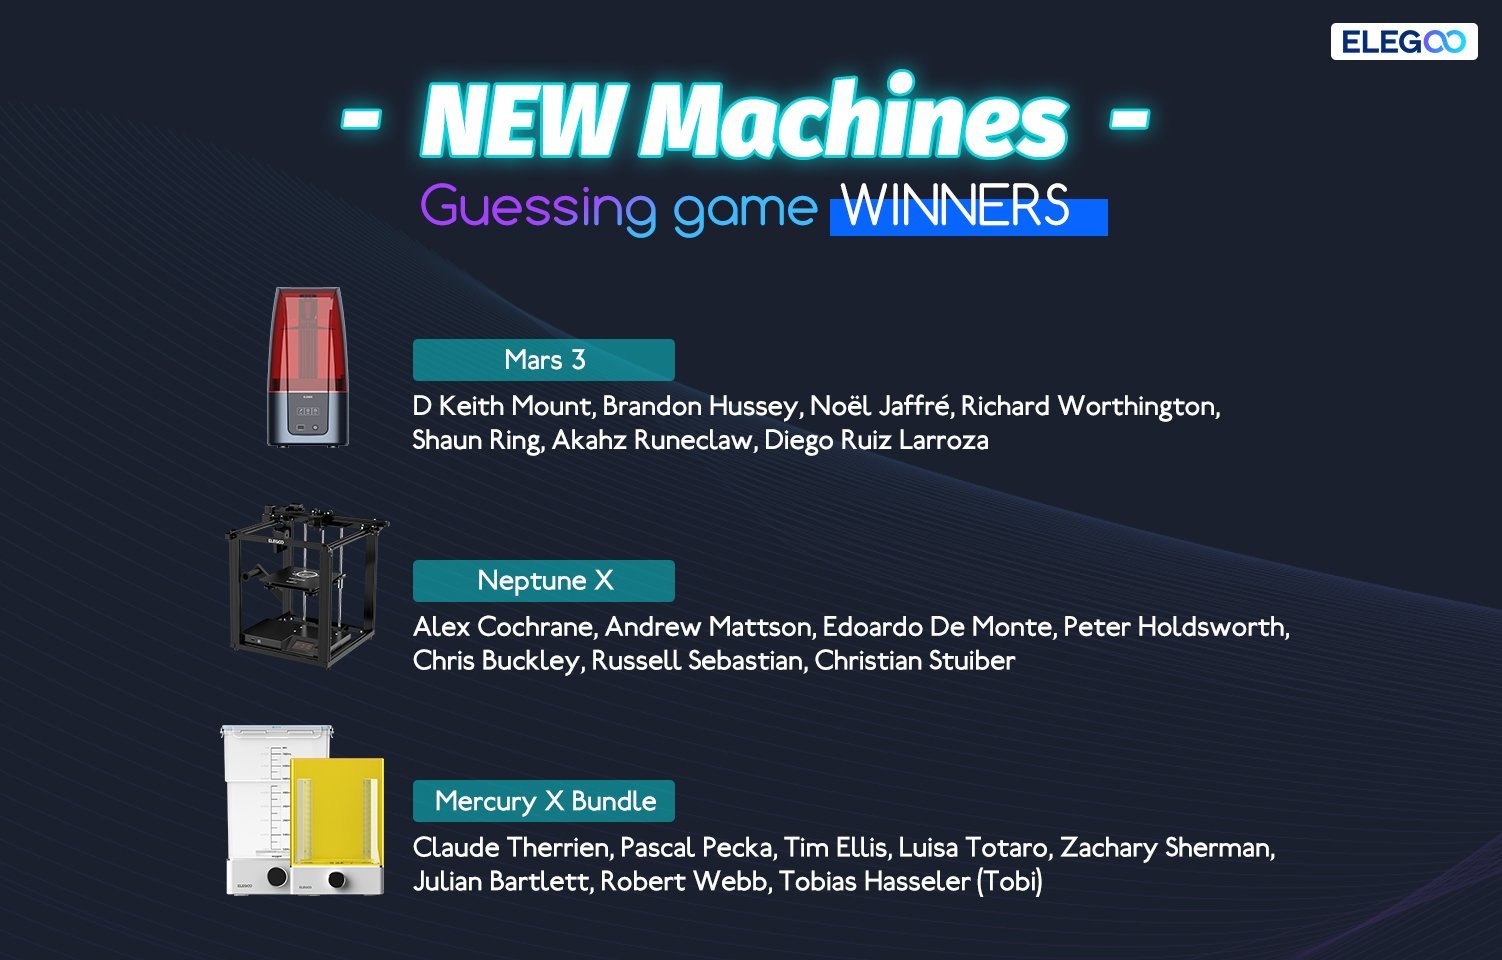 New Machines Guessing Game WINNERS Announcement